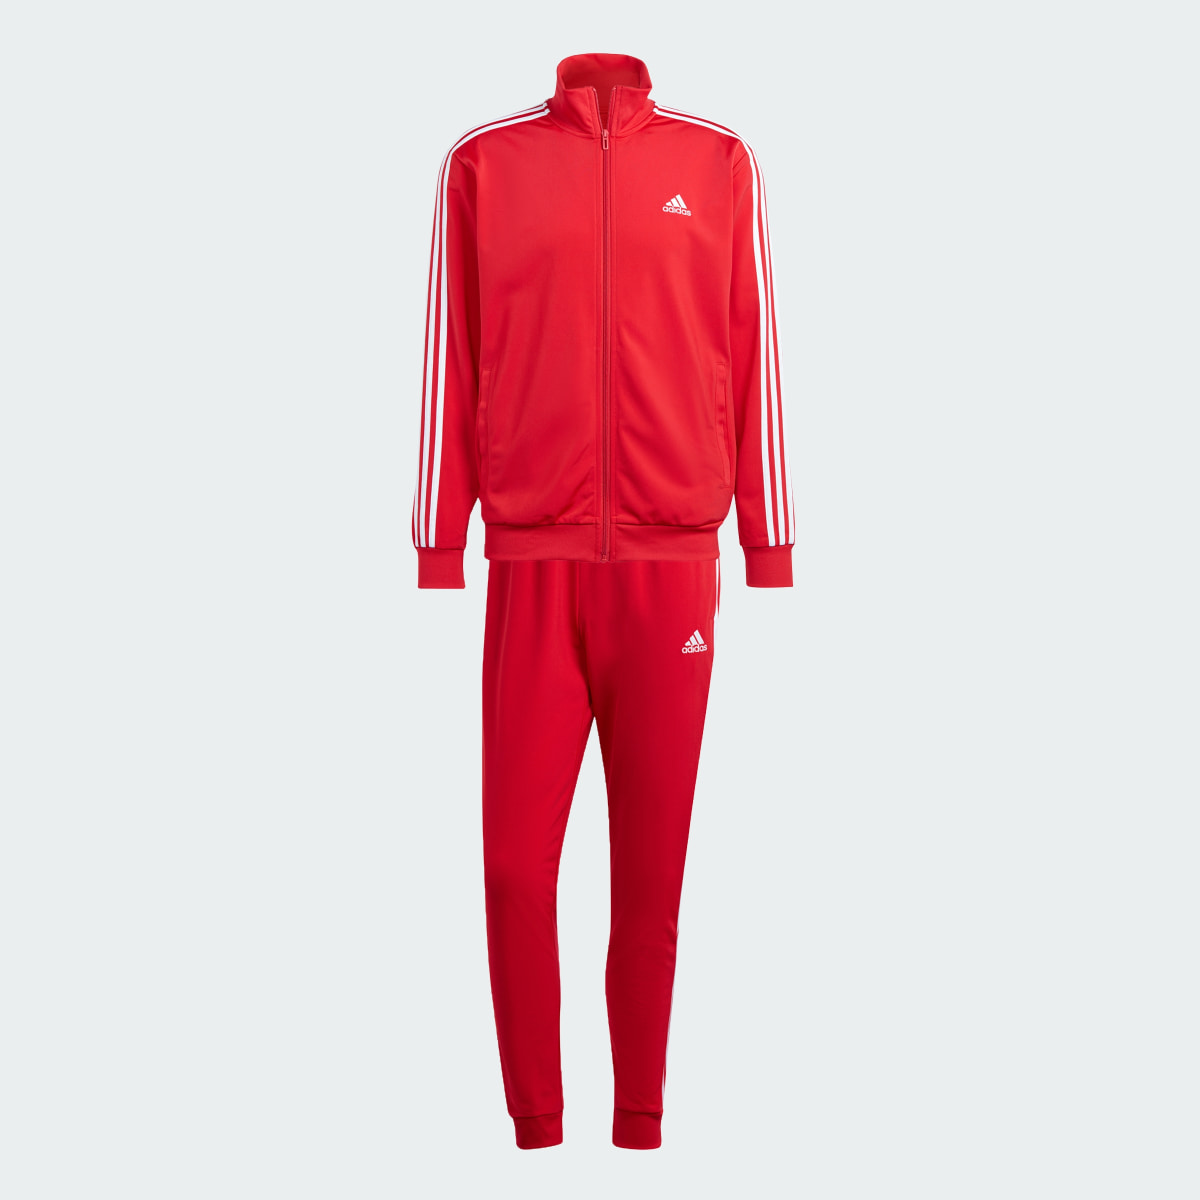 Adidas Basic 3-Stripes Tricot Track Suit. 5